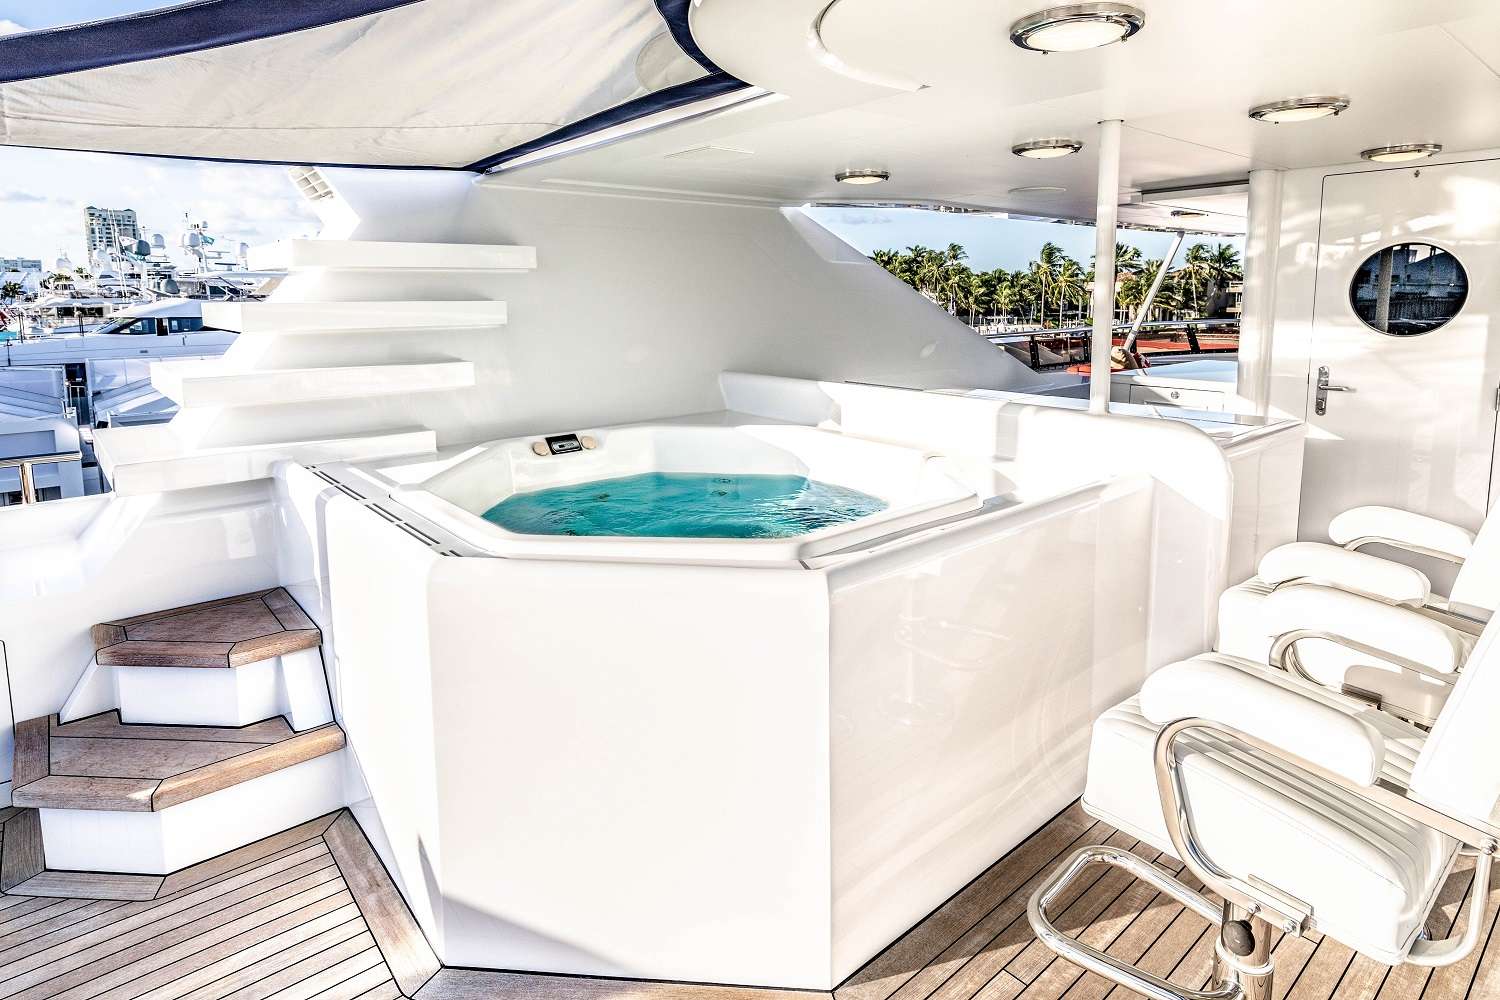 Motor Yacht 'NEVER ENOUGH' Jacuzzi, 10 PAX, 7 Crew, 140.00 Ft, 42.00 Meters, Built 1992, Feadship, Refit Year 2019